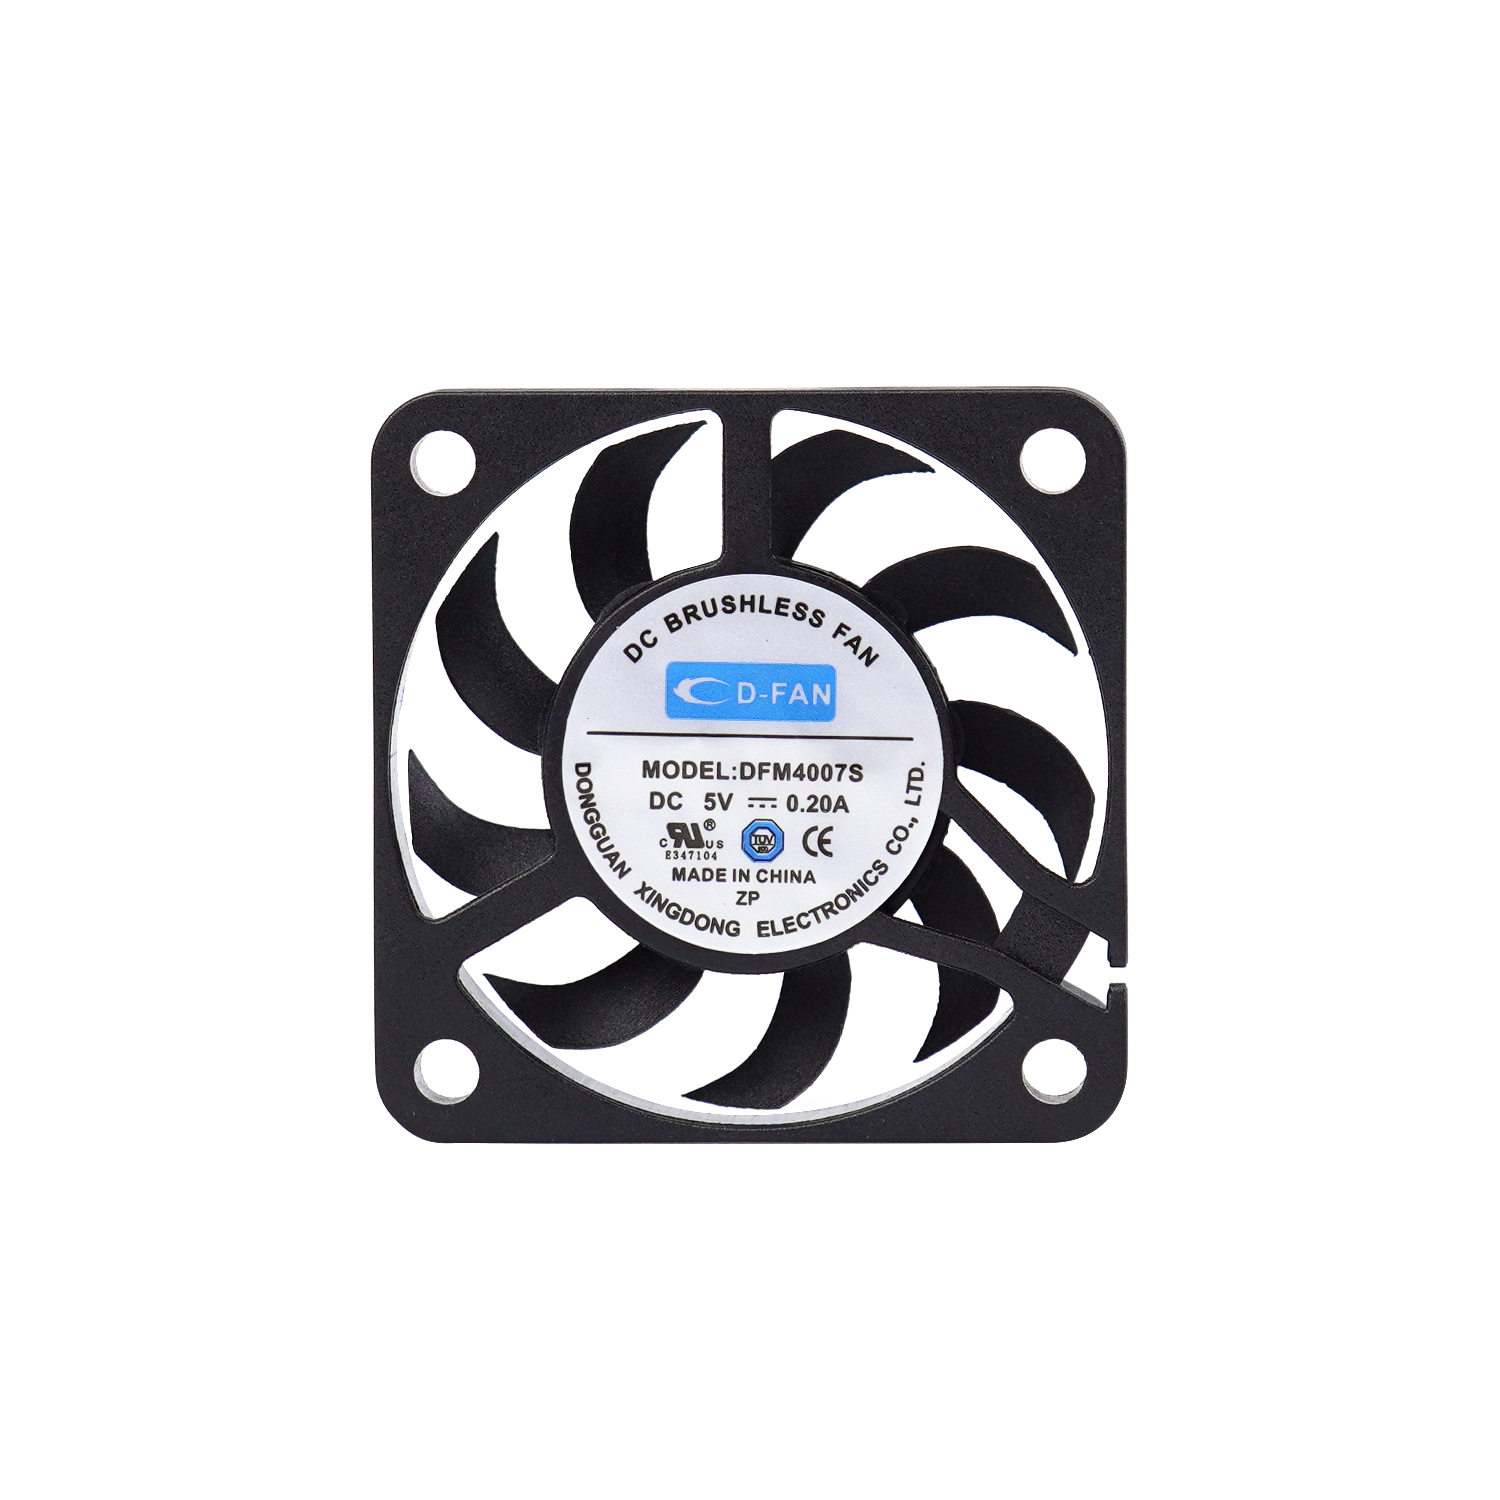 4007 7000rpm DC Cooling Brushless Fan with Soft-Start 